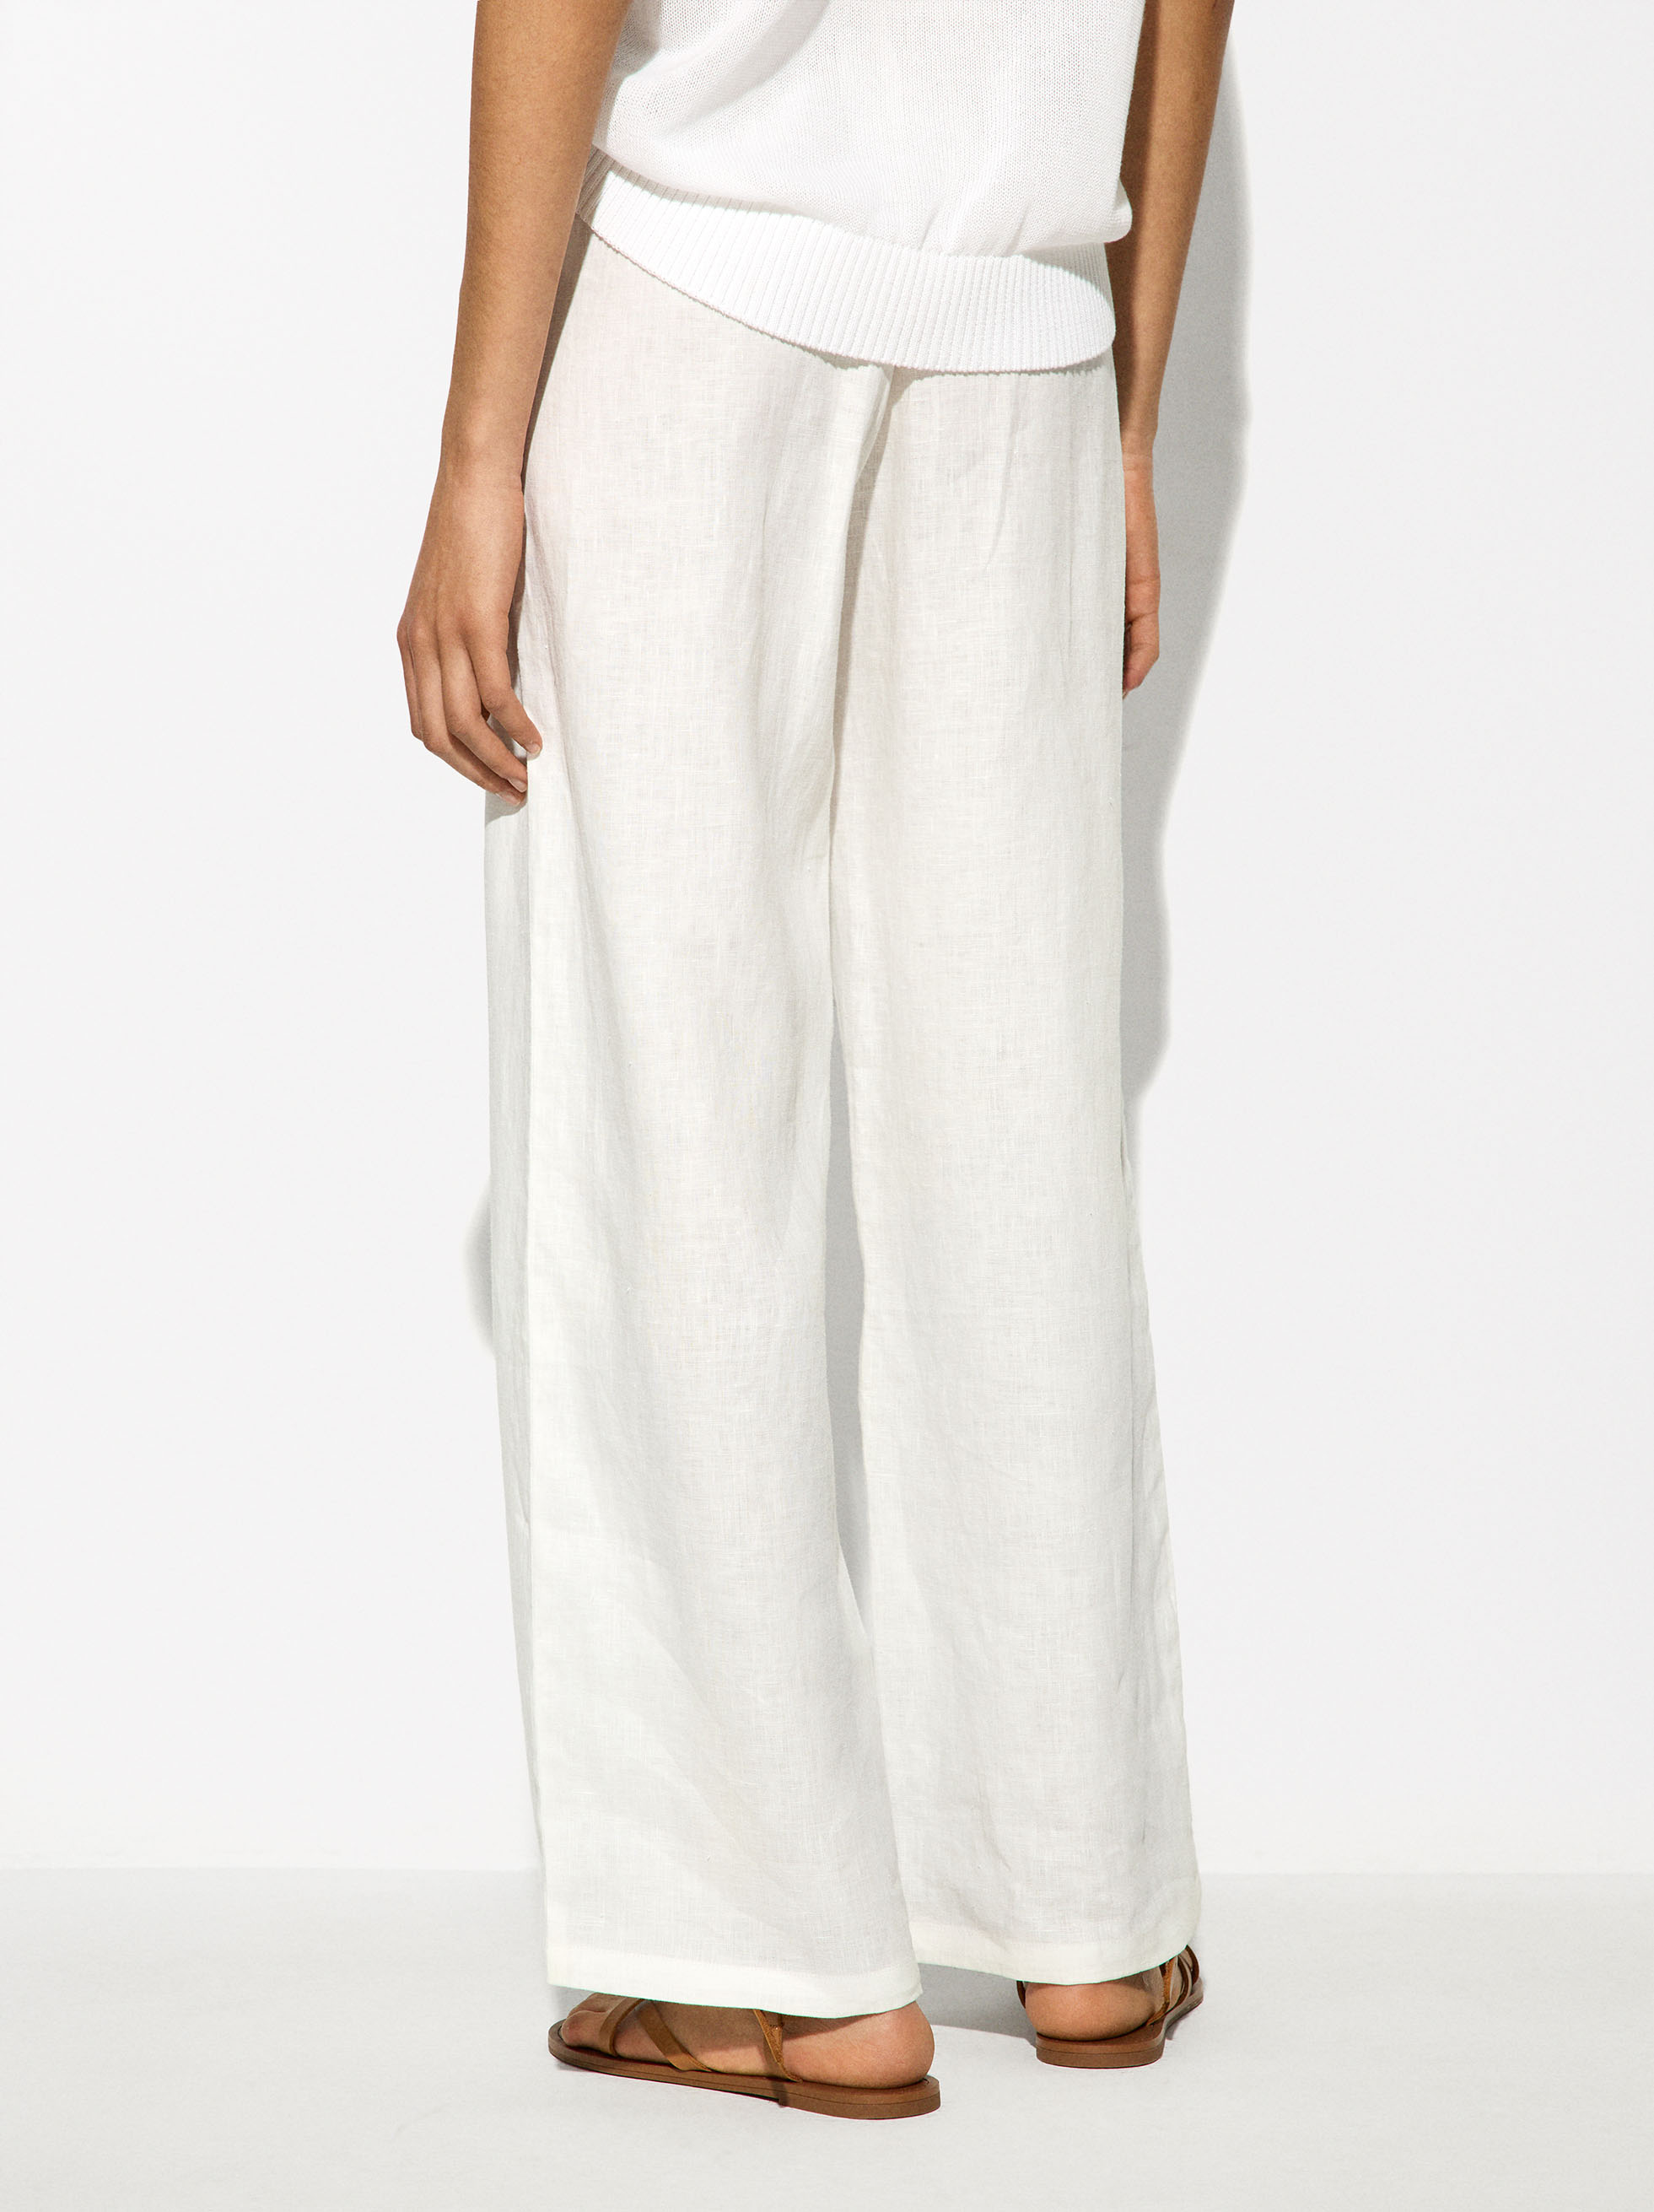 100% Linen Trousers image number 4.0